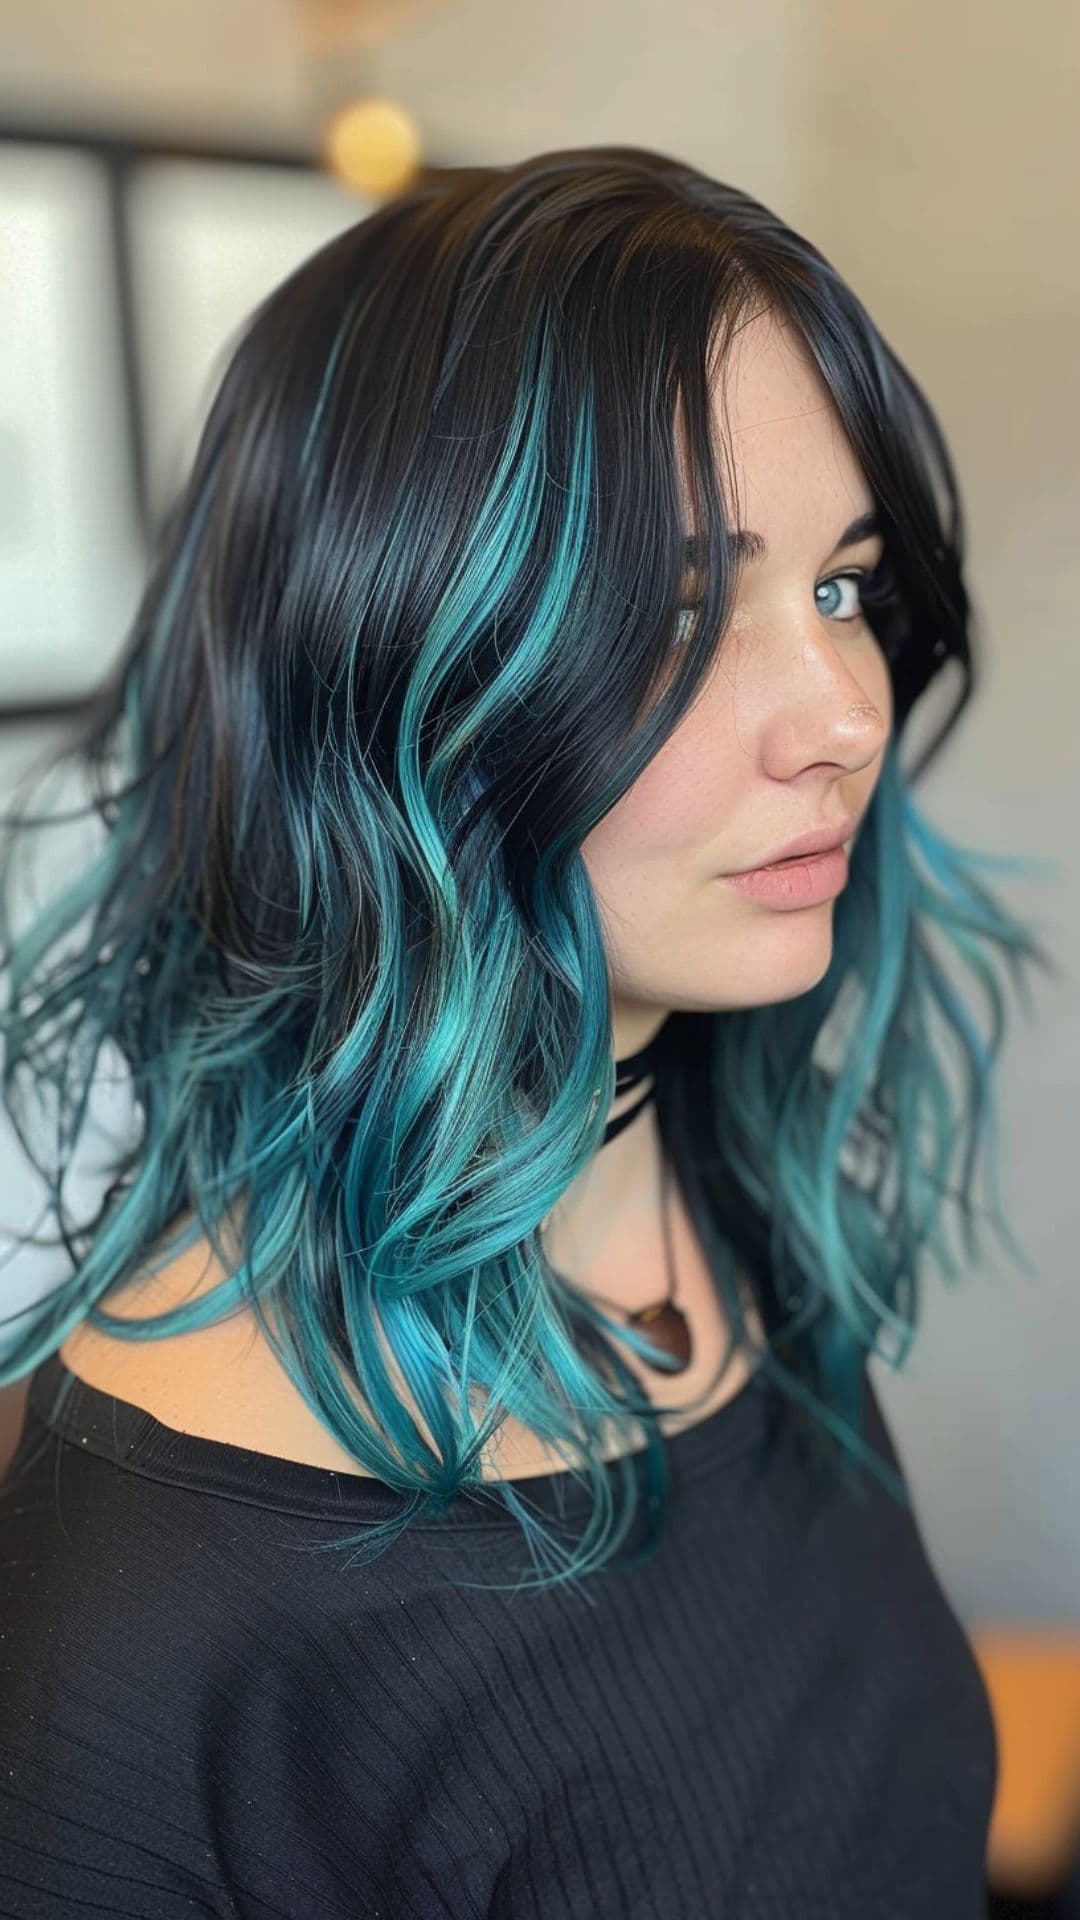 A woman modelling a black and teal hair.